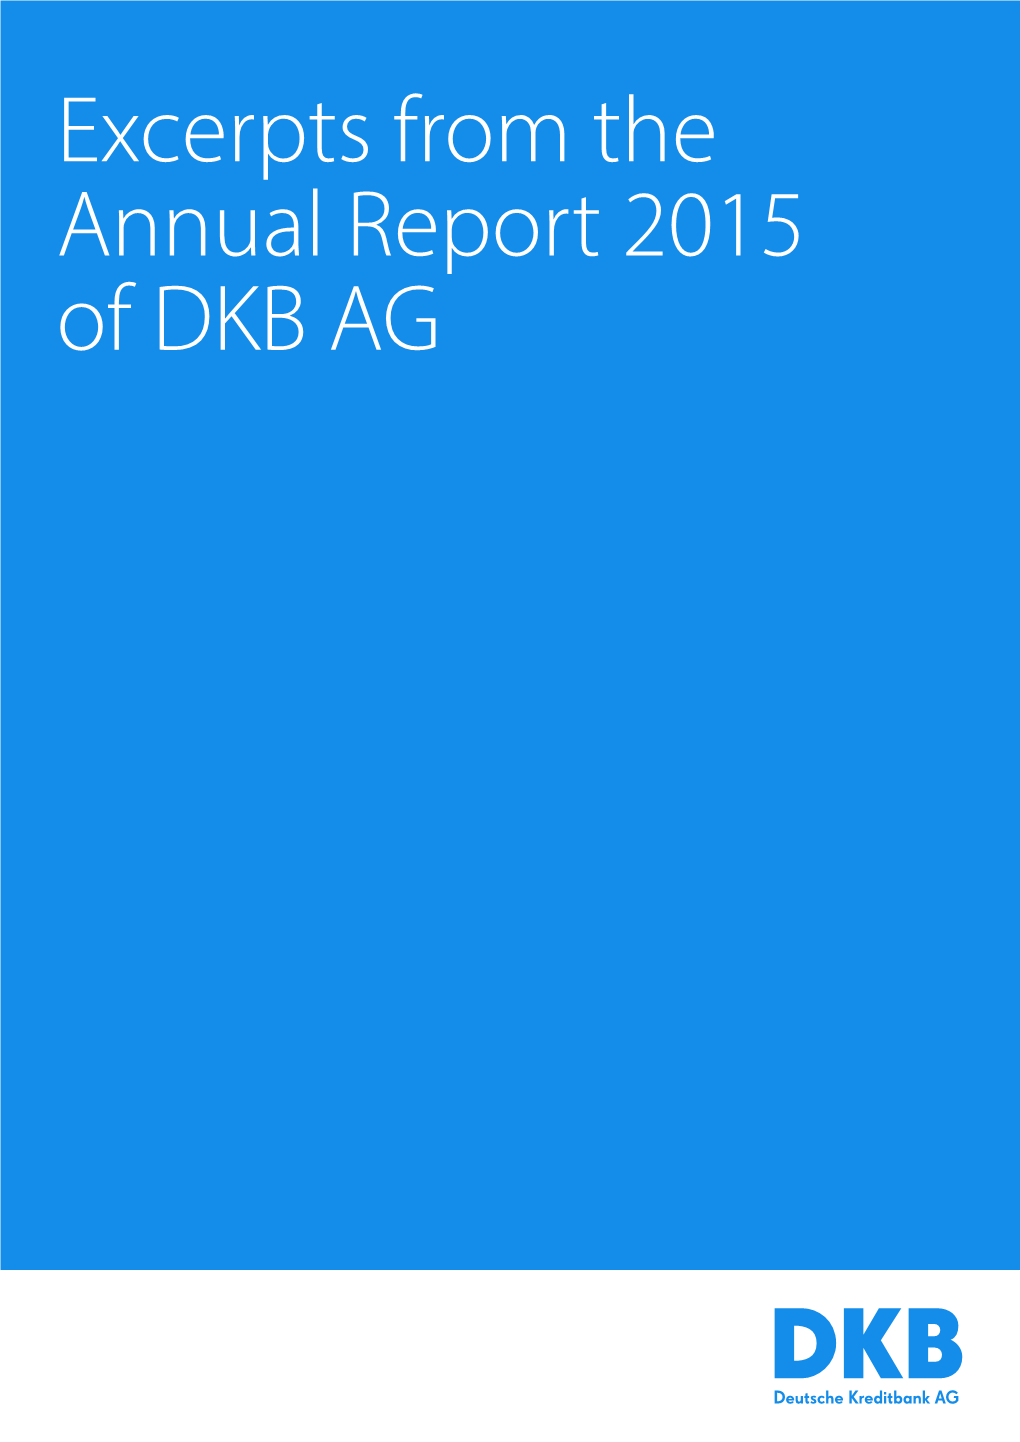 Excerpts from the Annual Report 2015 of DKB AG 1 | Excerpts from the Annual Report 2015 of DKB AG | Disclaimer